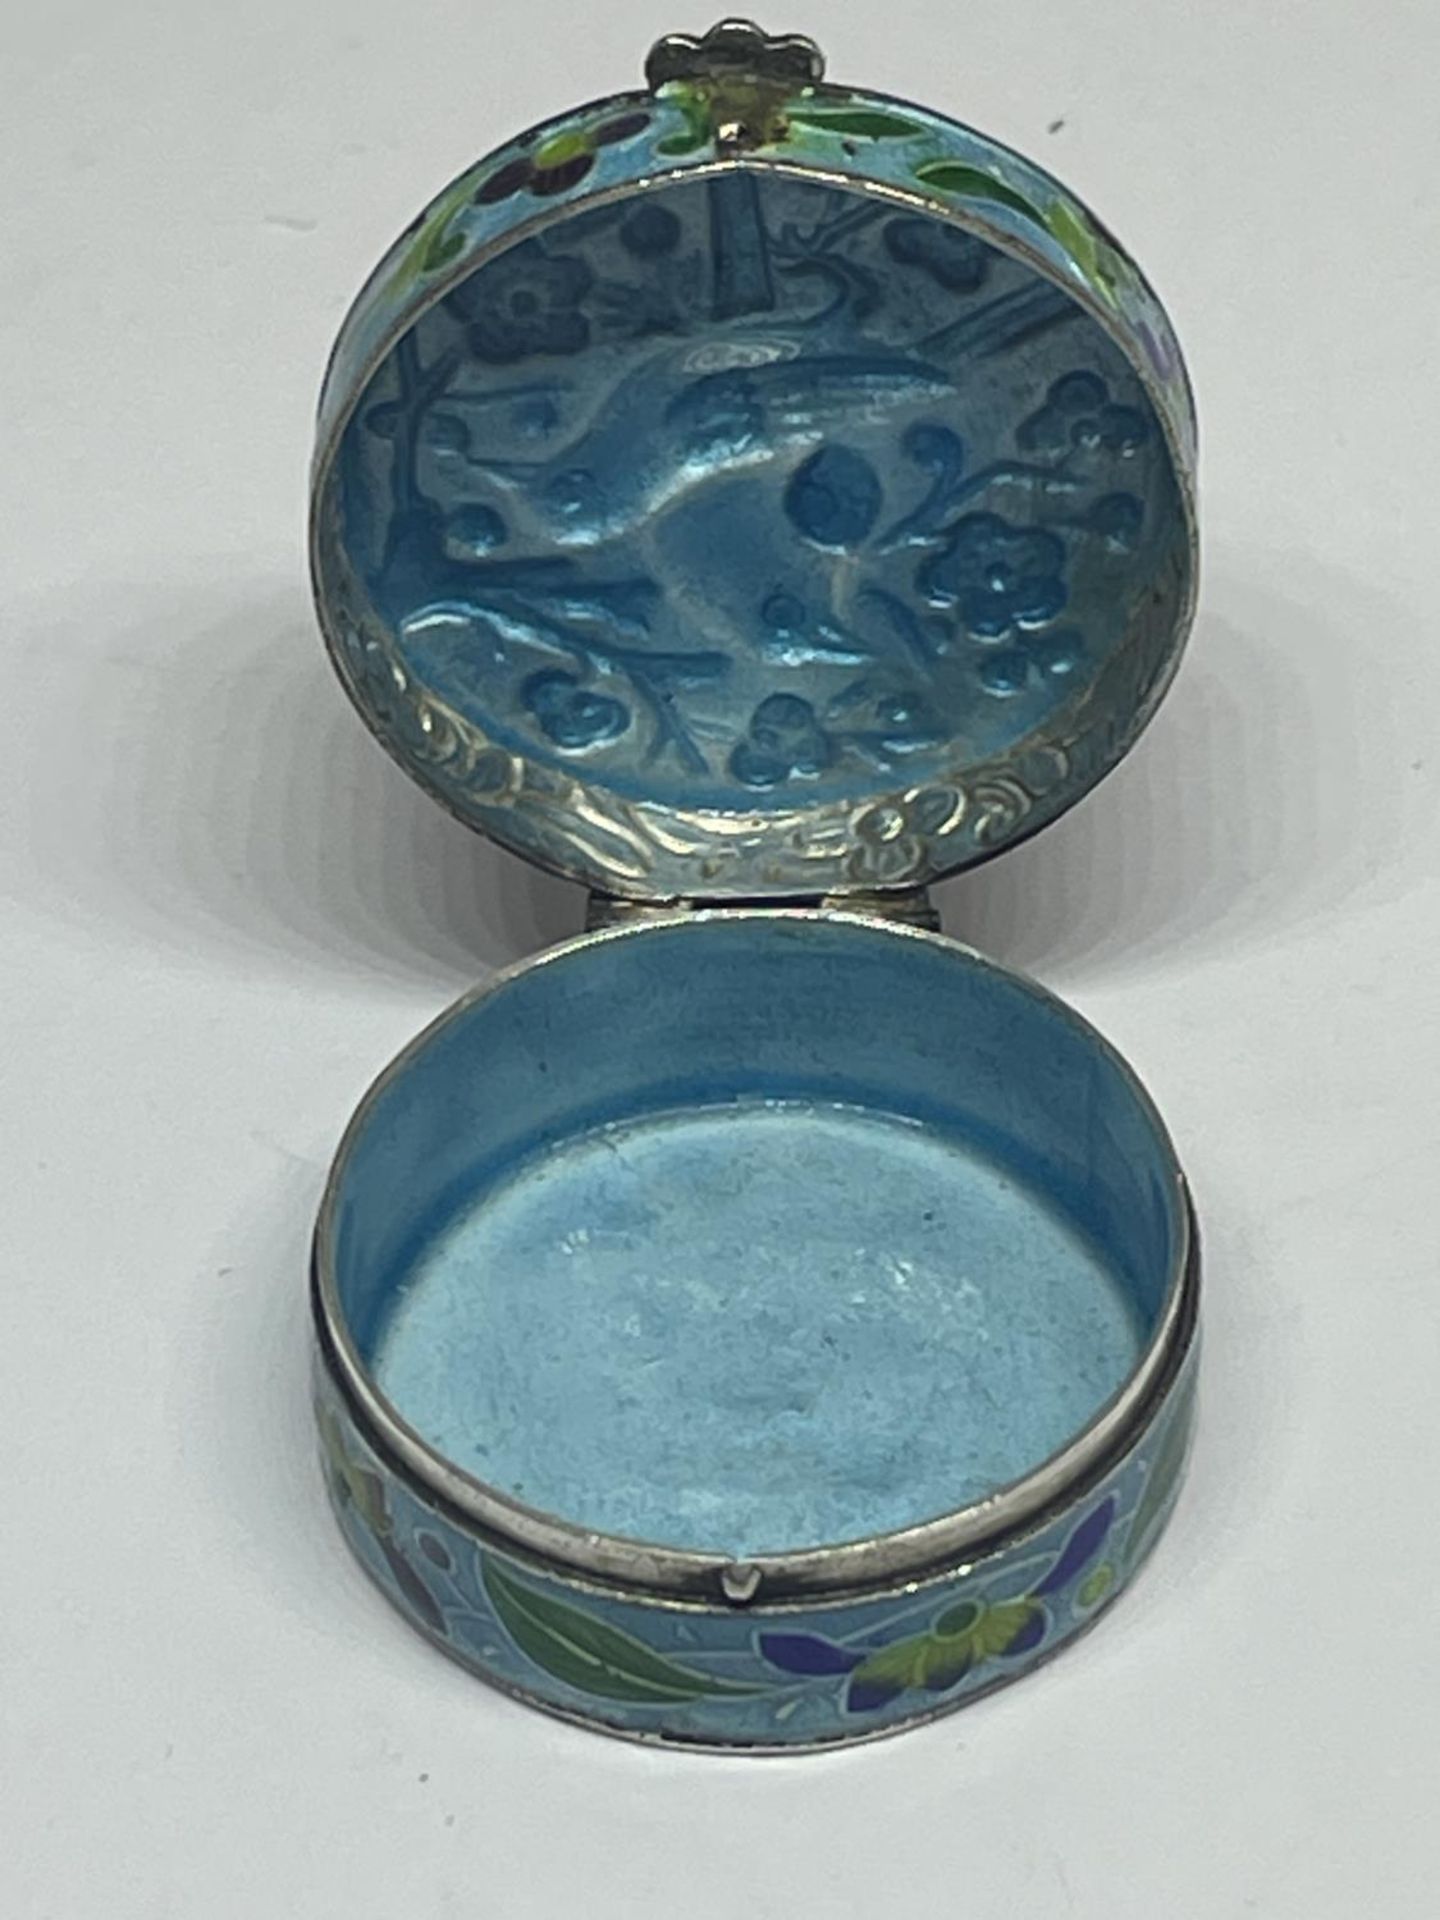 A SILVER CIRCULAR PILL BOX WITH ENAMEL BIRD DESIGN LID AND SIDES - Image 3 of 4